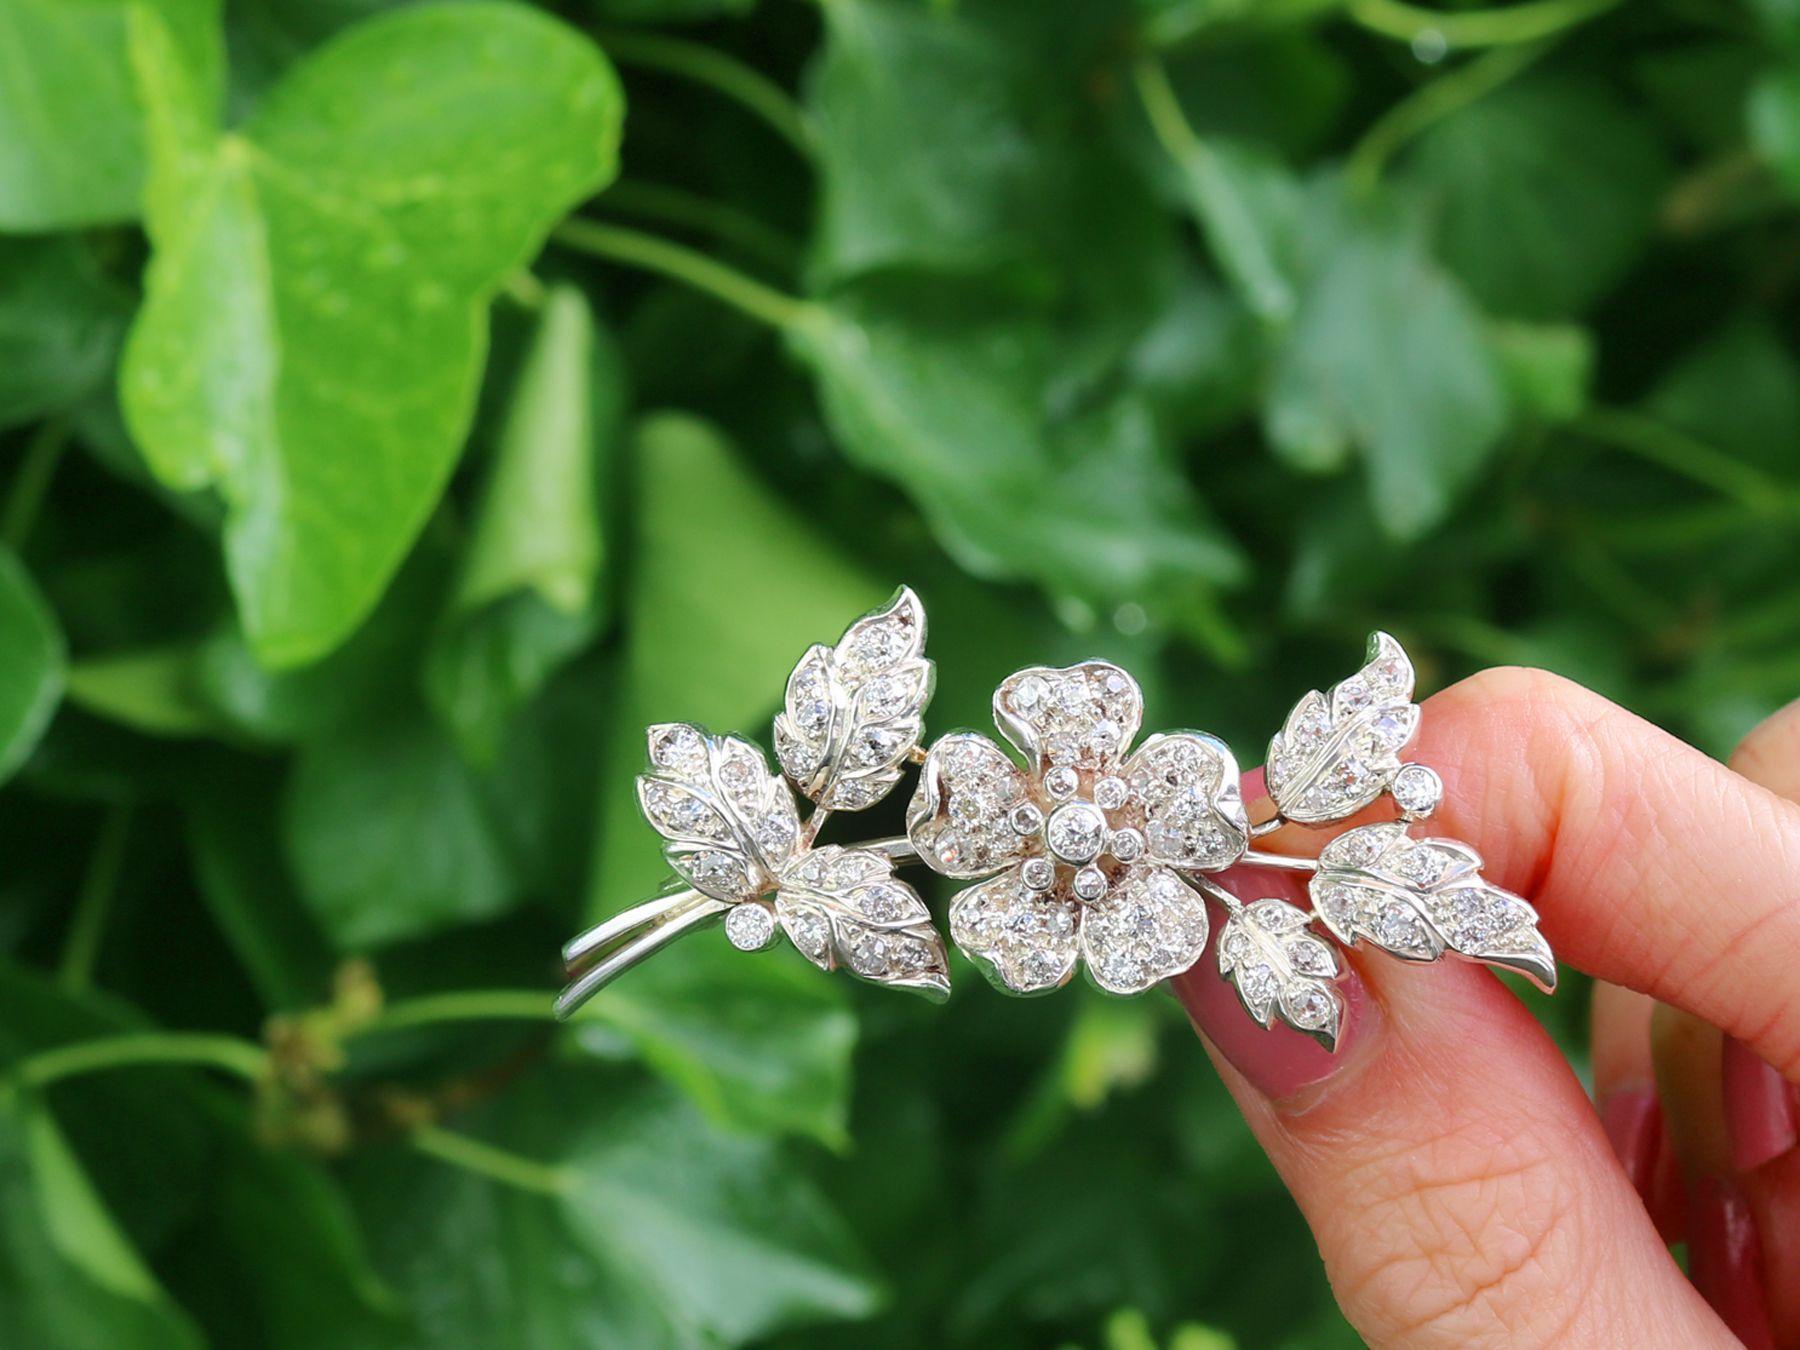 A stunning, fine and impressive antique European 3.25 carat diamond and 9 karat yellow gold, silver set flower brooch; part of our diverse antique jewelry and estate jewelry collections

This stunning, fine and impressive diamond and gold brooch has